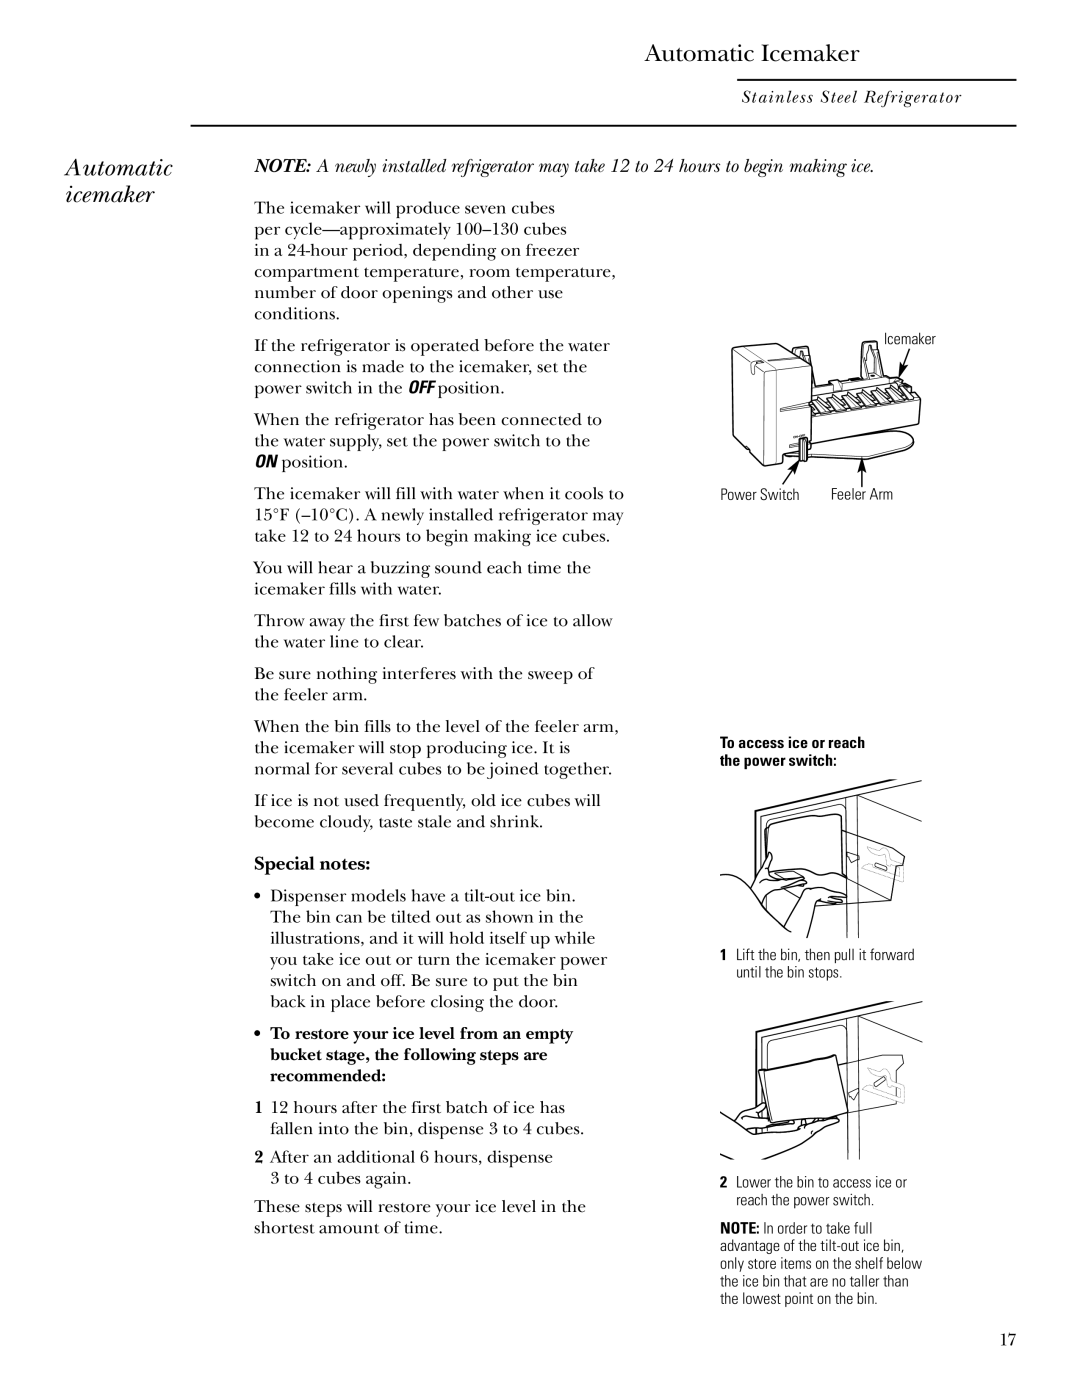 GE r10965v-1 owner manual Automatic Icemaker, Automatic icemaker, Special notes 